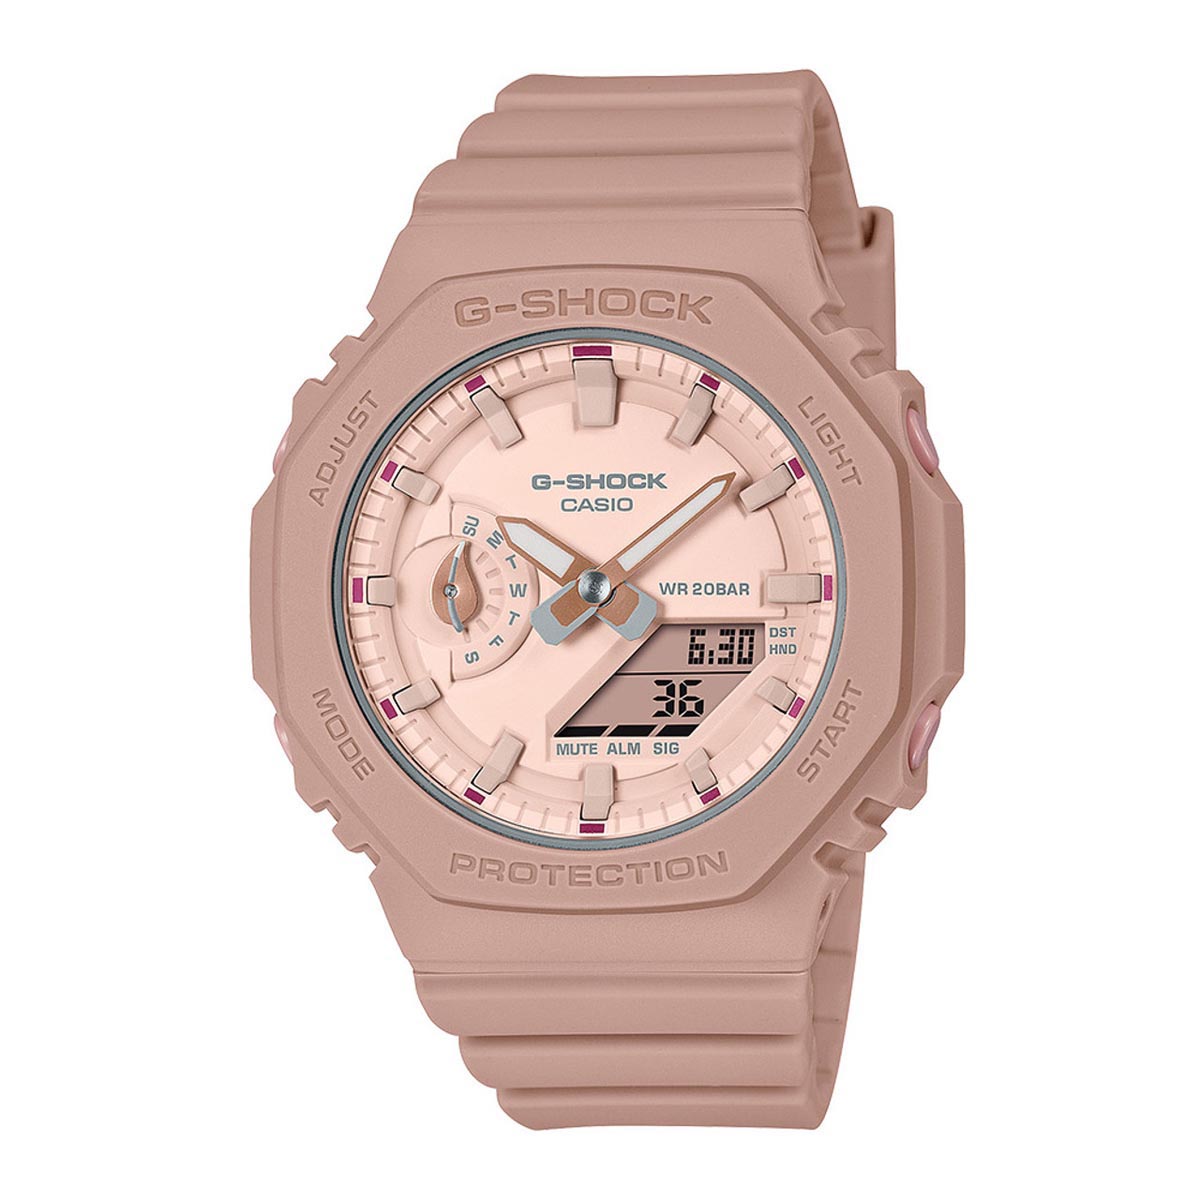 G-Shock Women's Watch with Pink Dial and Pink Resin Band (quartz movement)